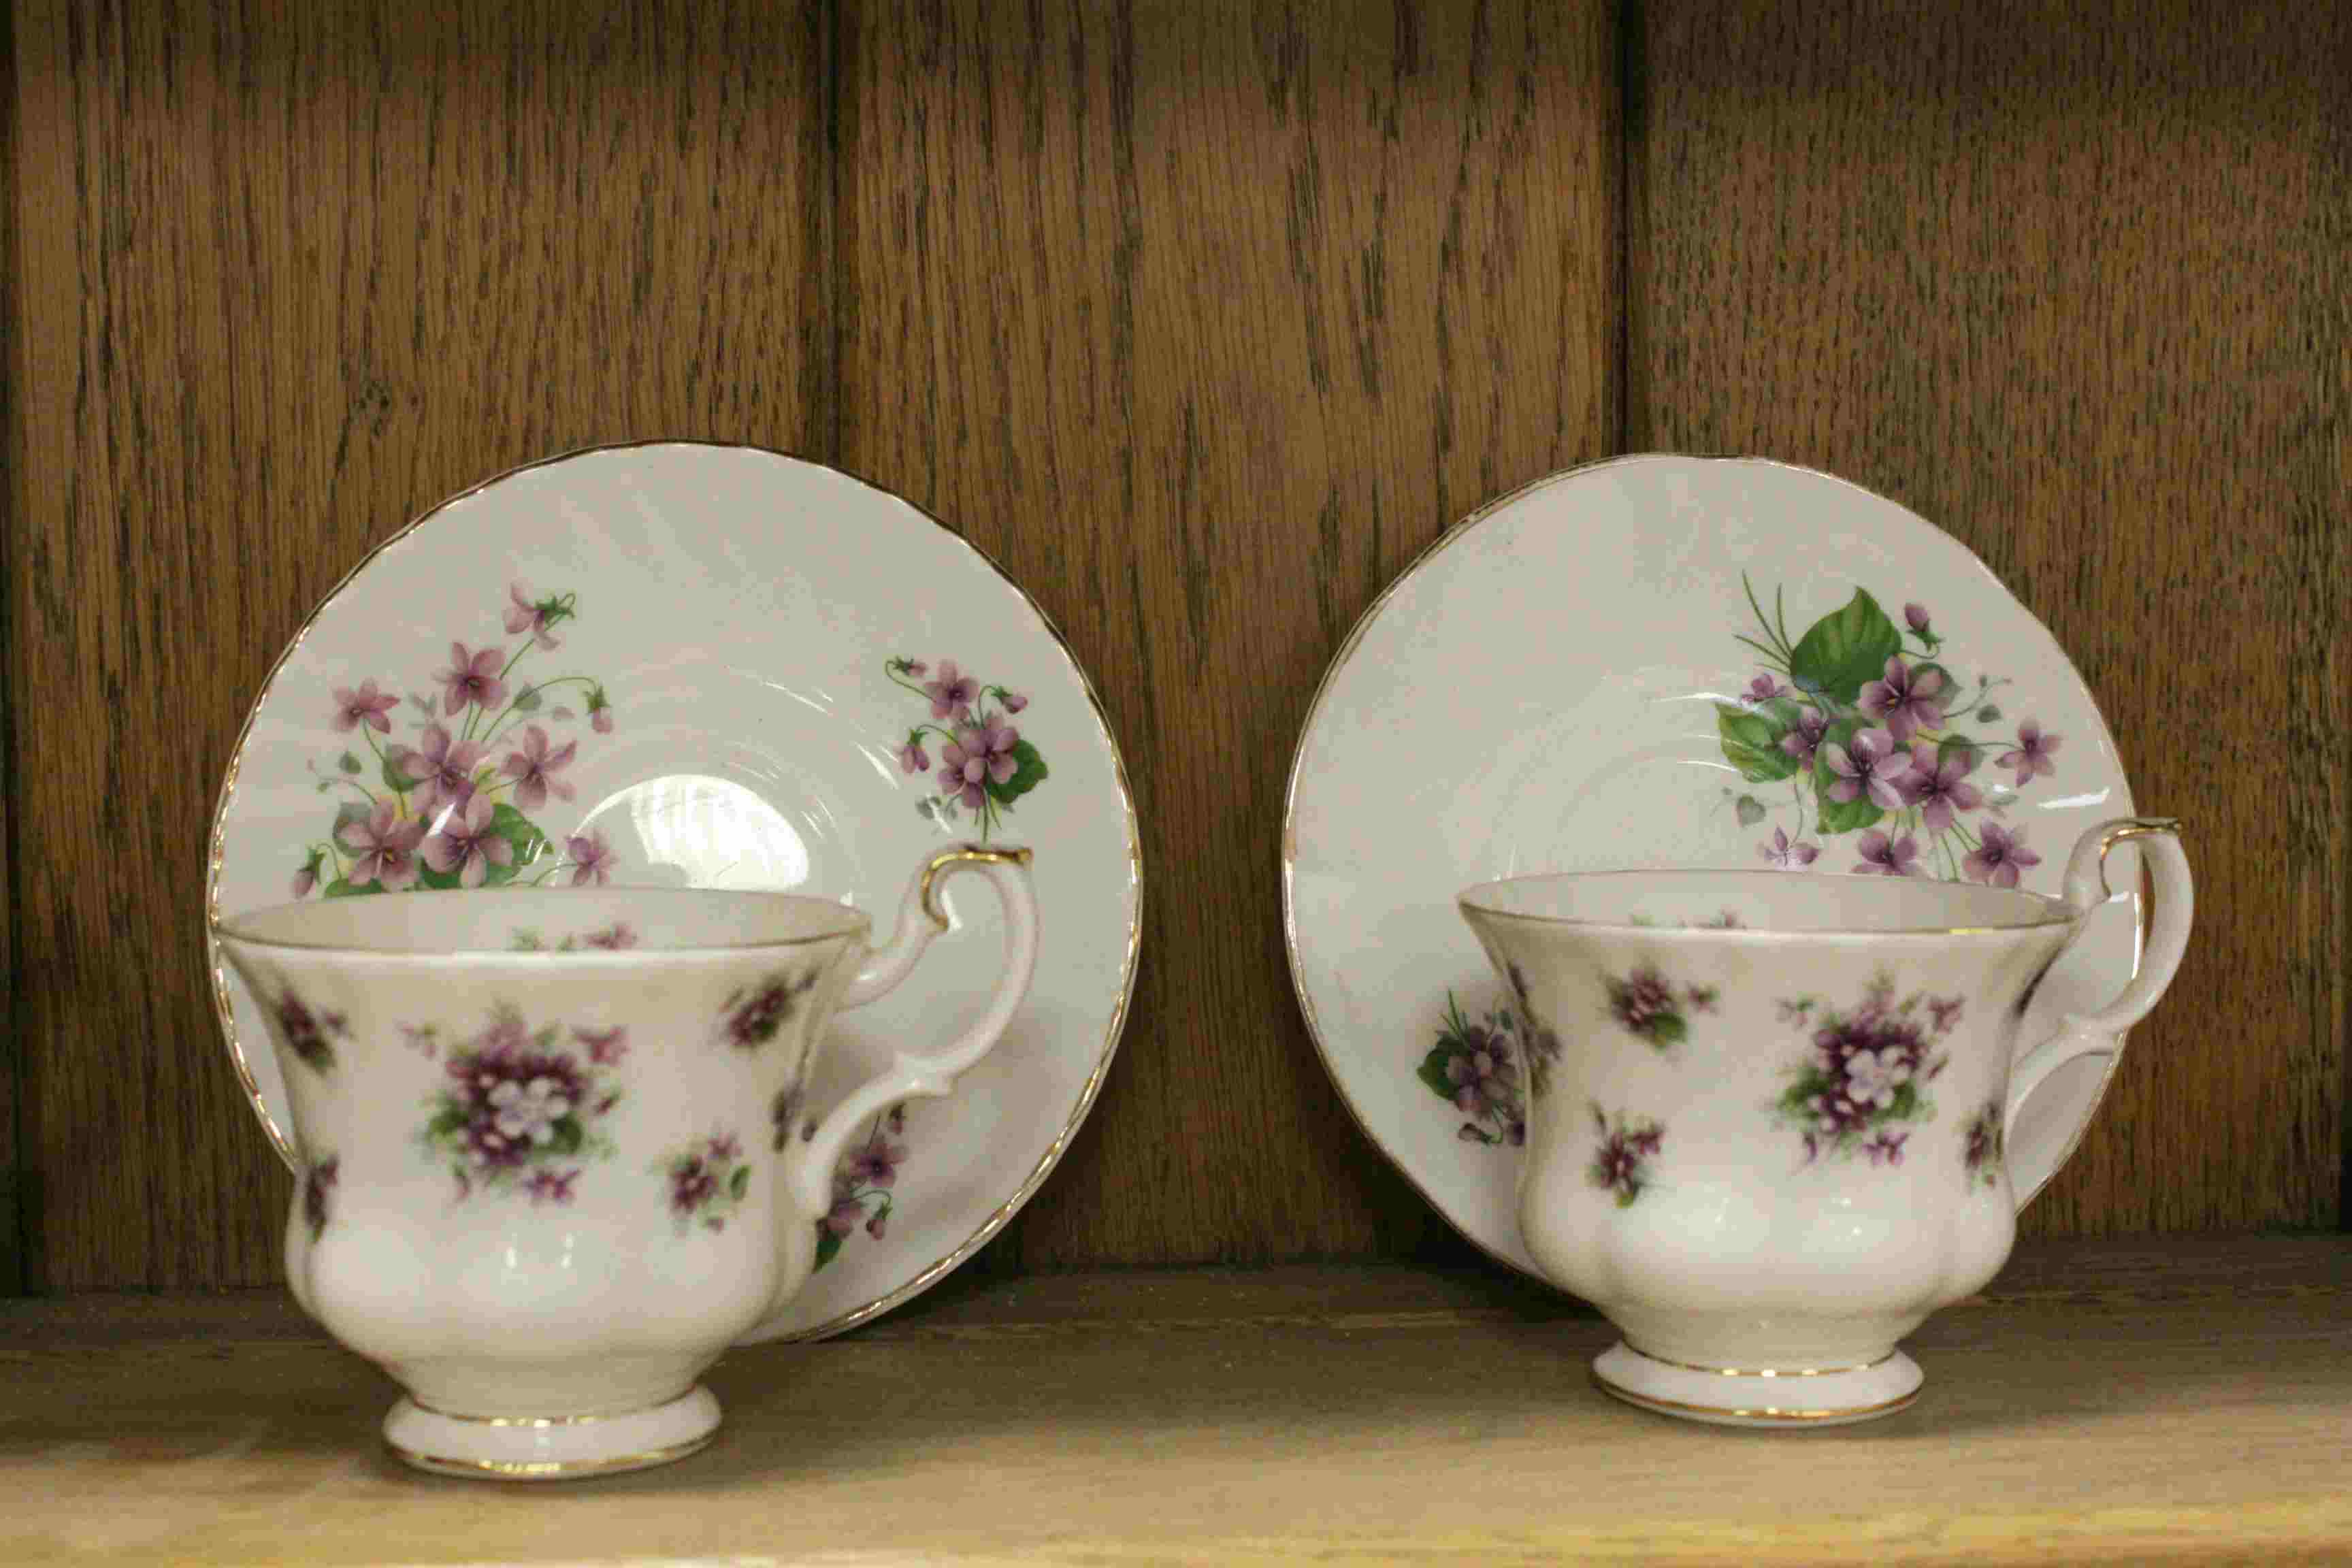 Royal Albert Old Country Roses including Four Coffee Cups and Saucers, Six Tea Cups and Saucers, - Image 5 of 7